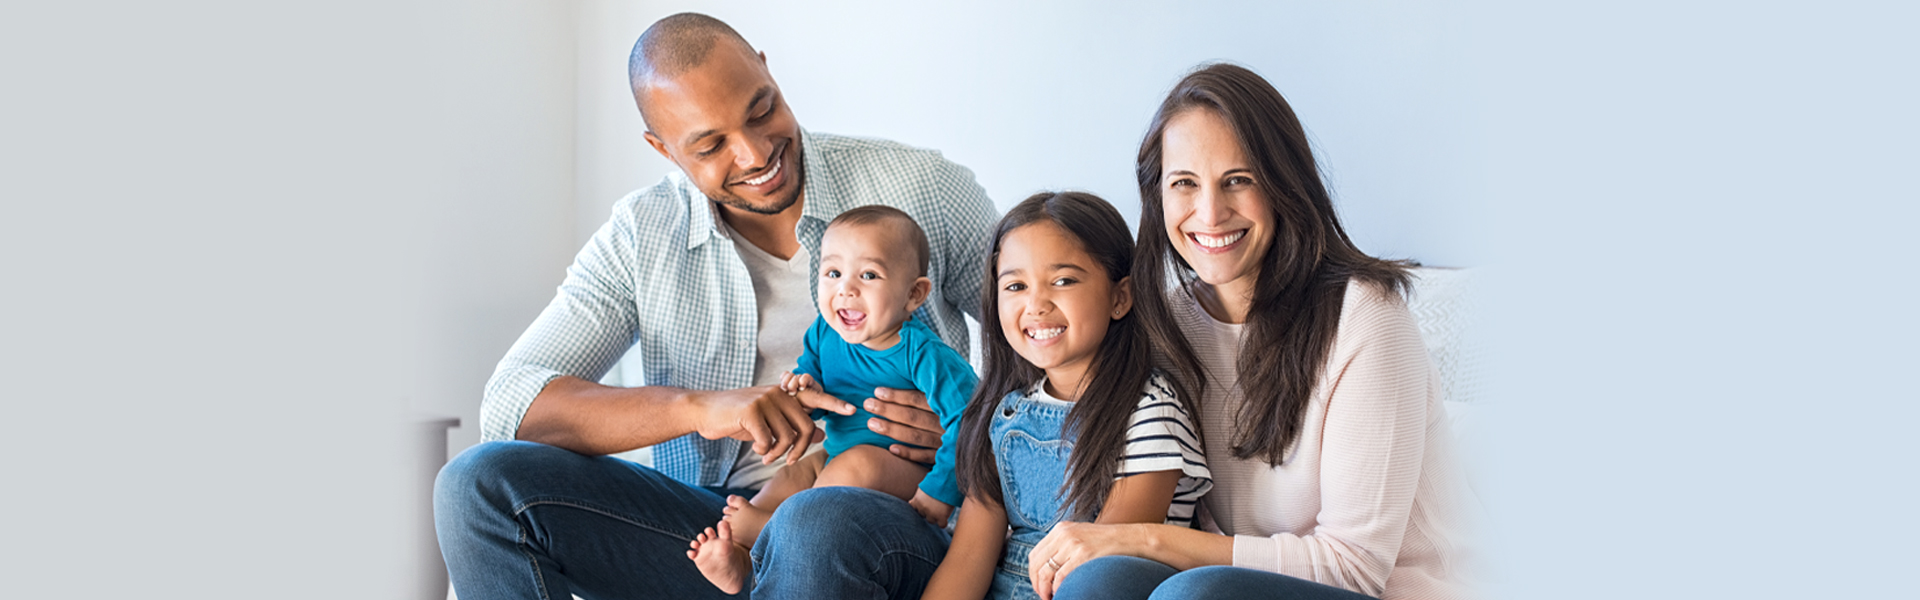 5 Tips for Keeping Your Family’s Smile Healthy